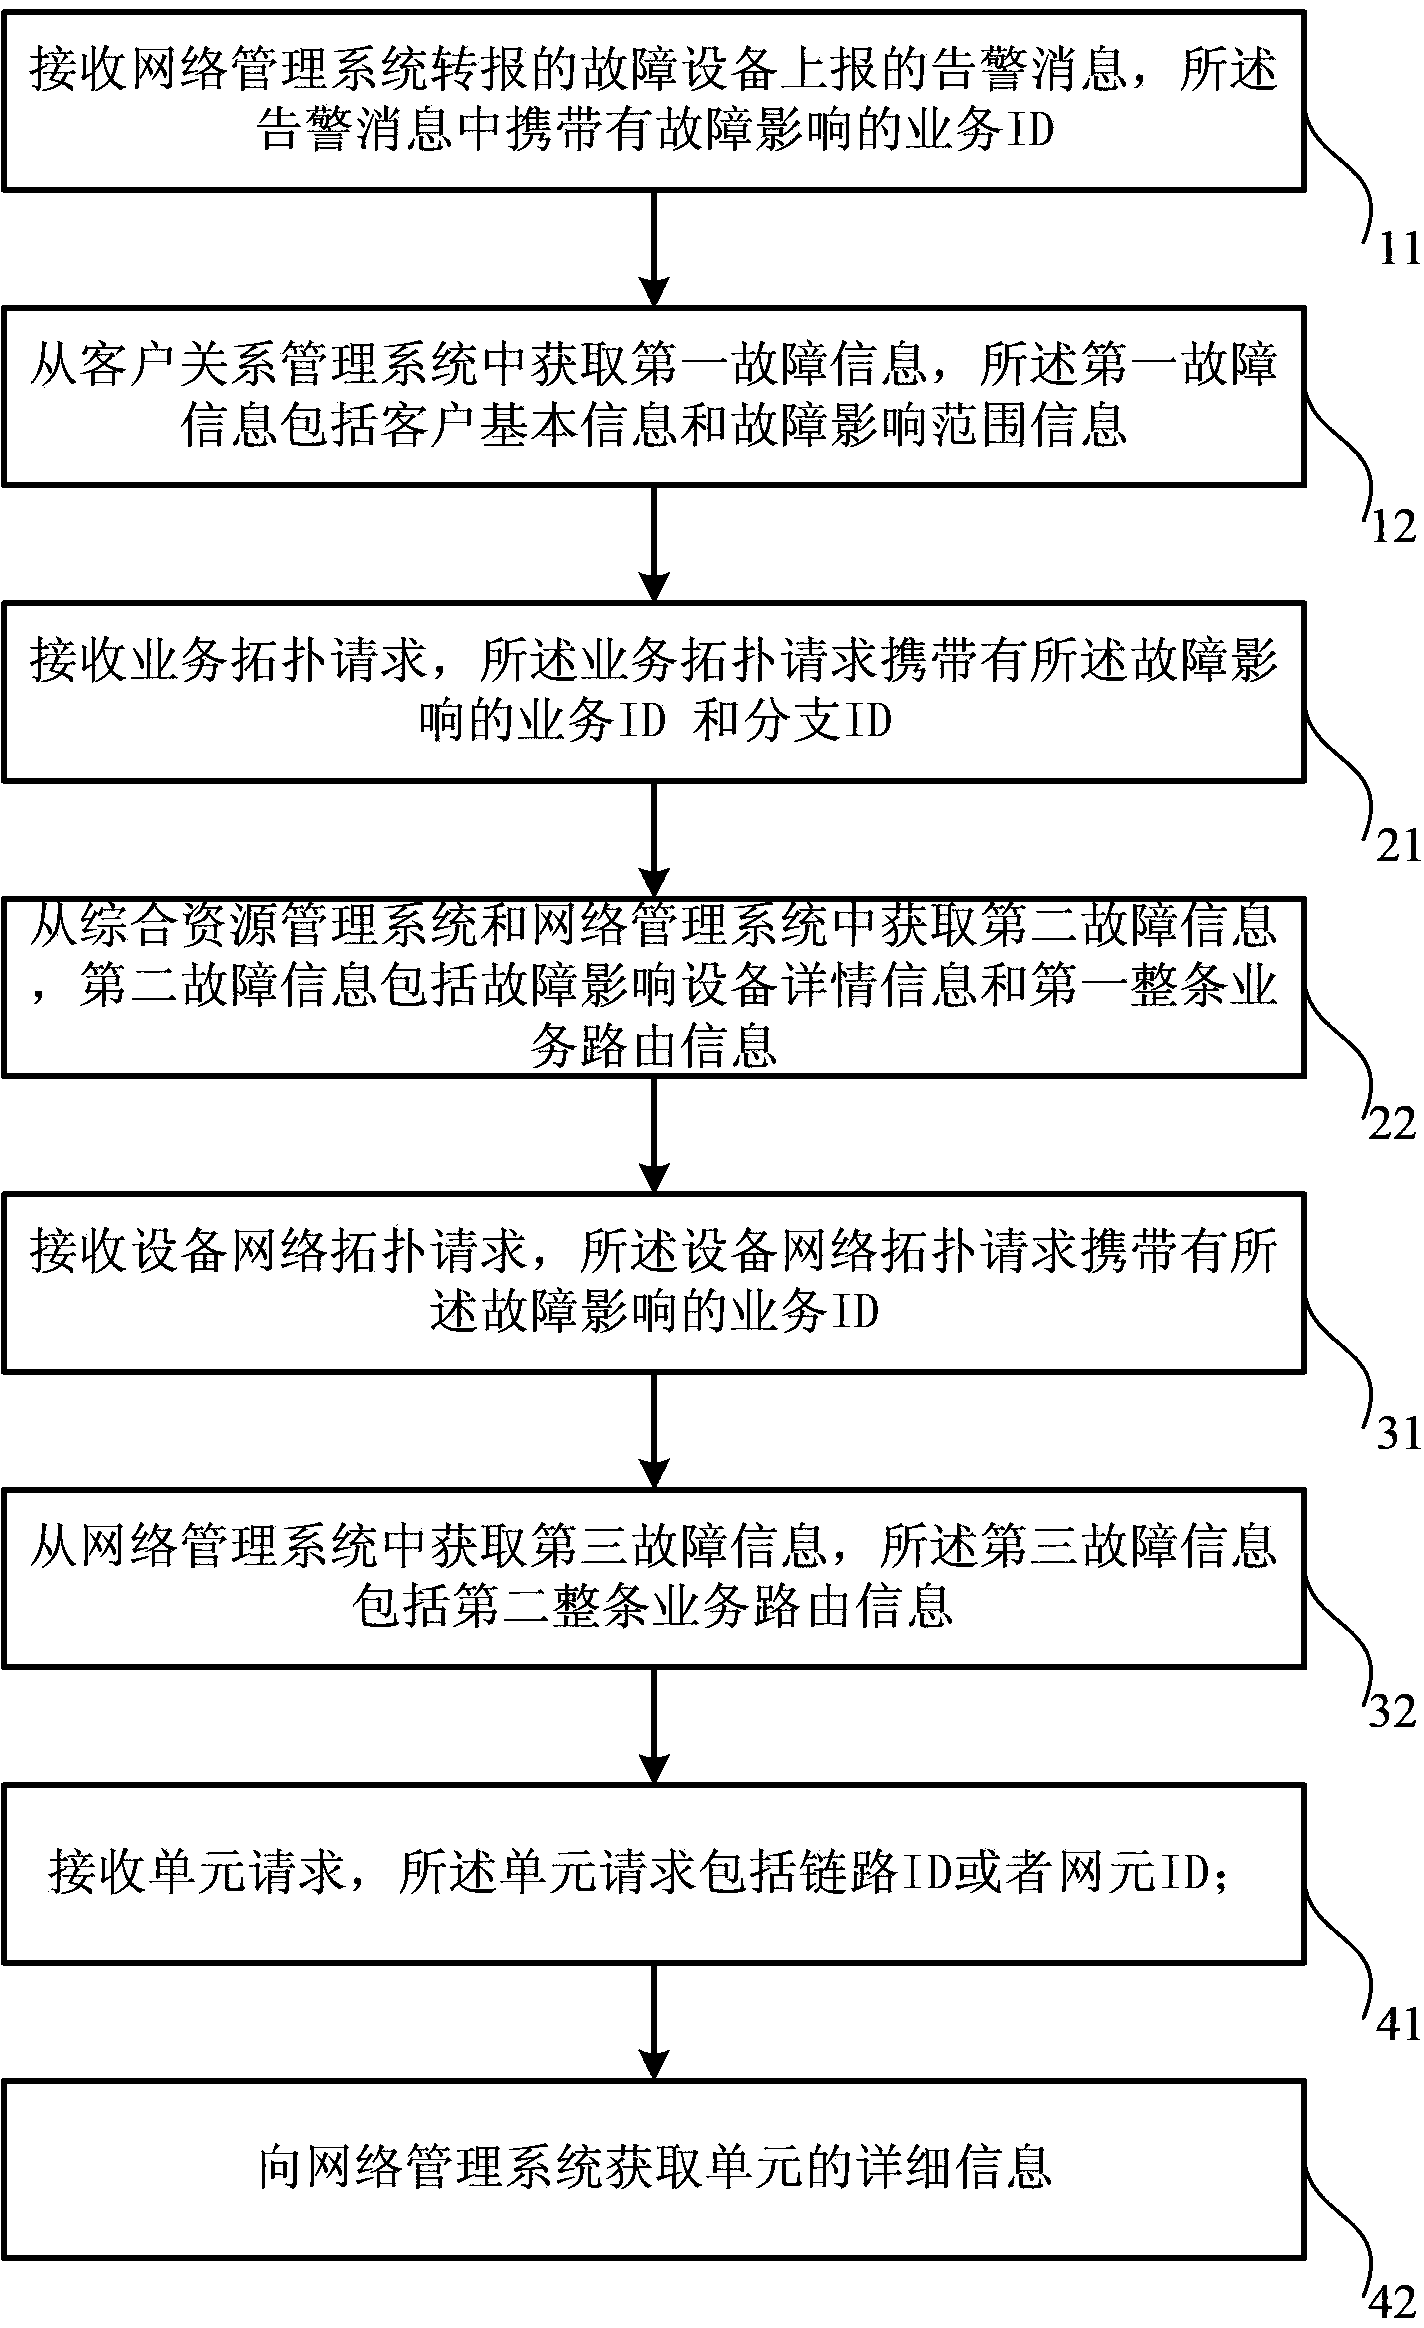 Network fault monitoring method and network fault monitoring system